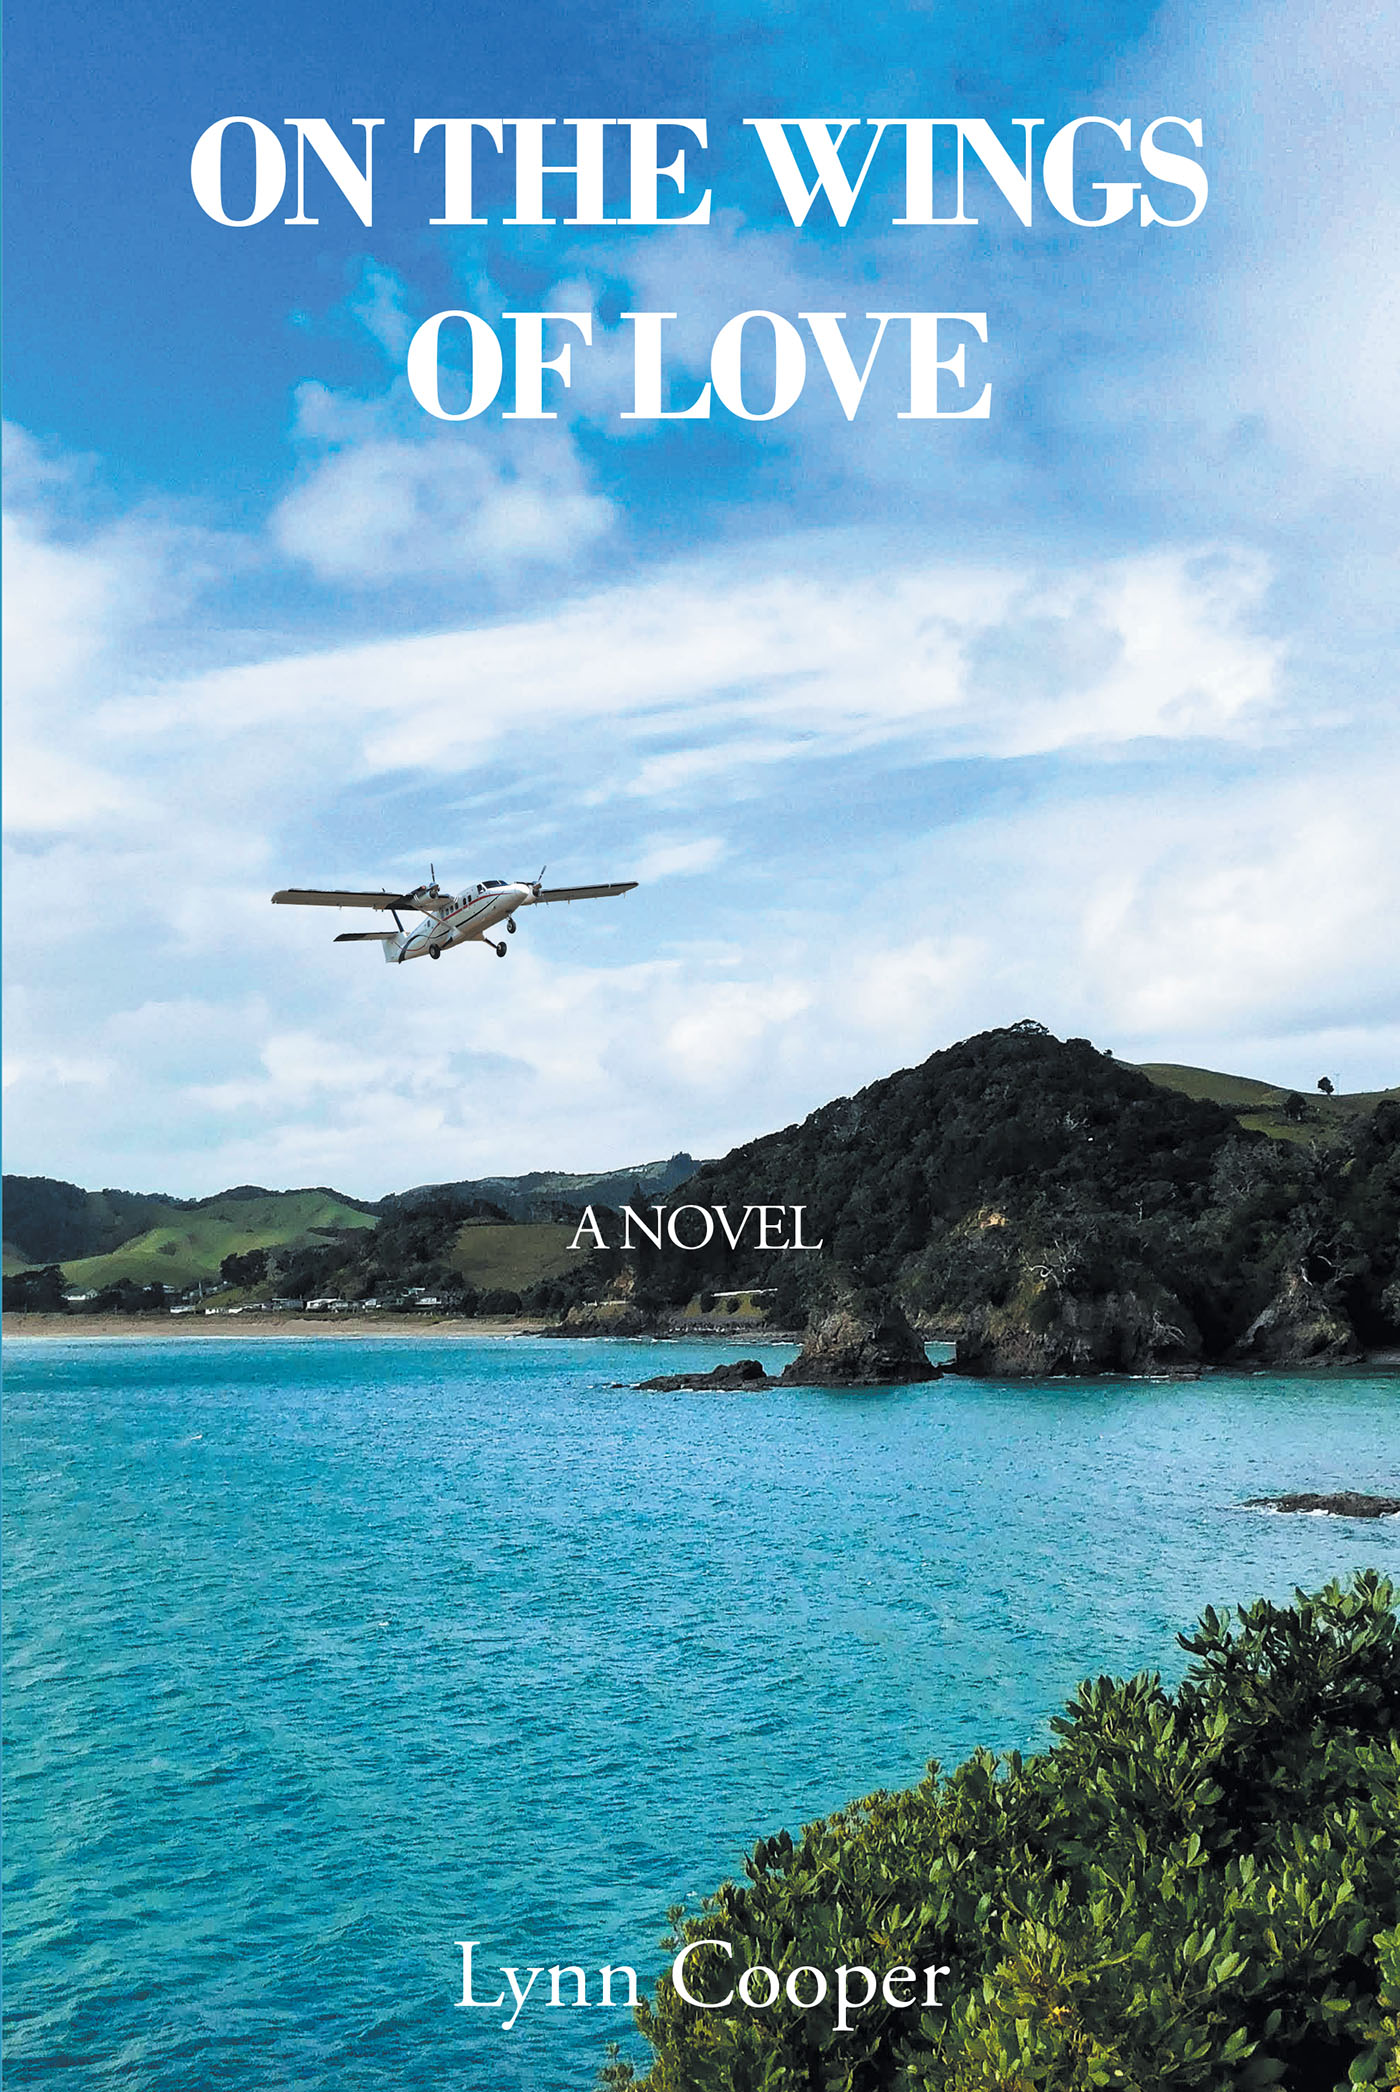 Lynn Cooper’s Newly Released "On the Wings of Love" is an Exciting and Uplifting Tale of Determined Faith and Dangerous Twists of Fate